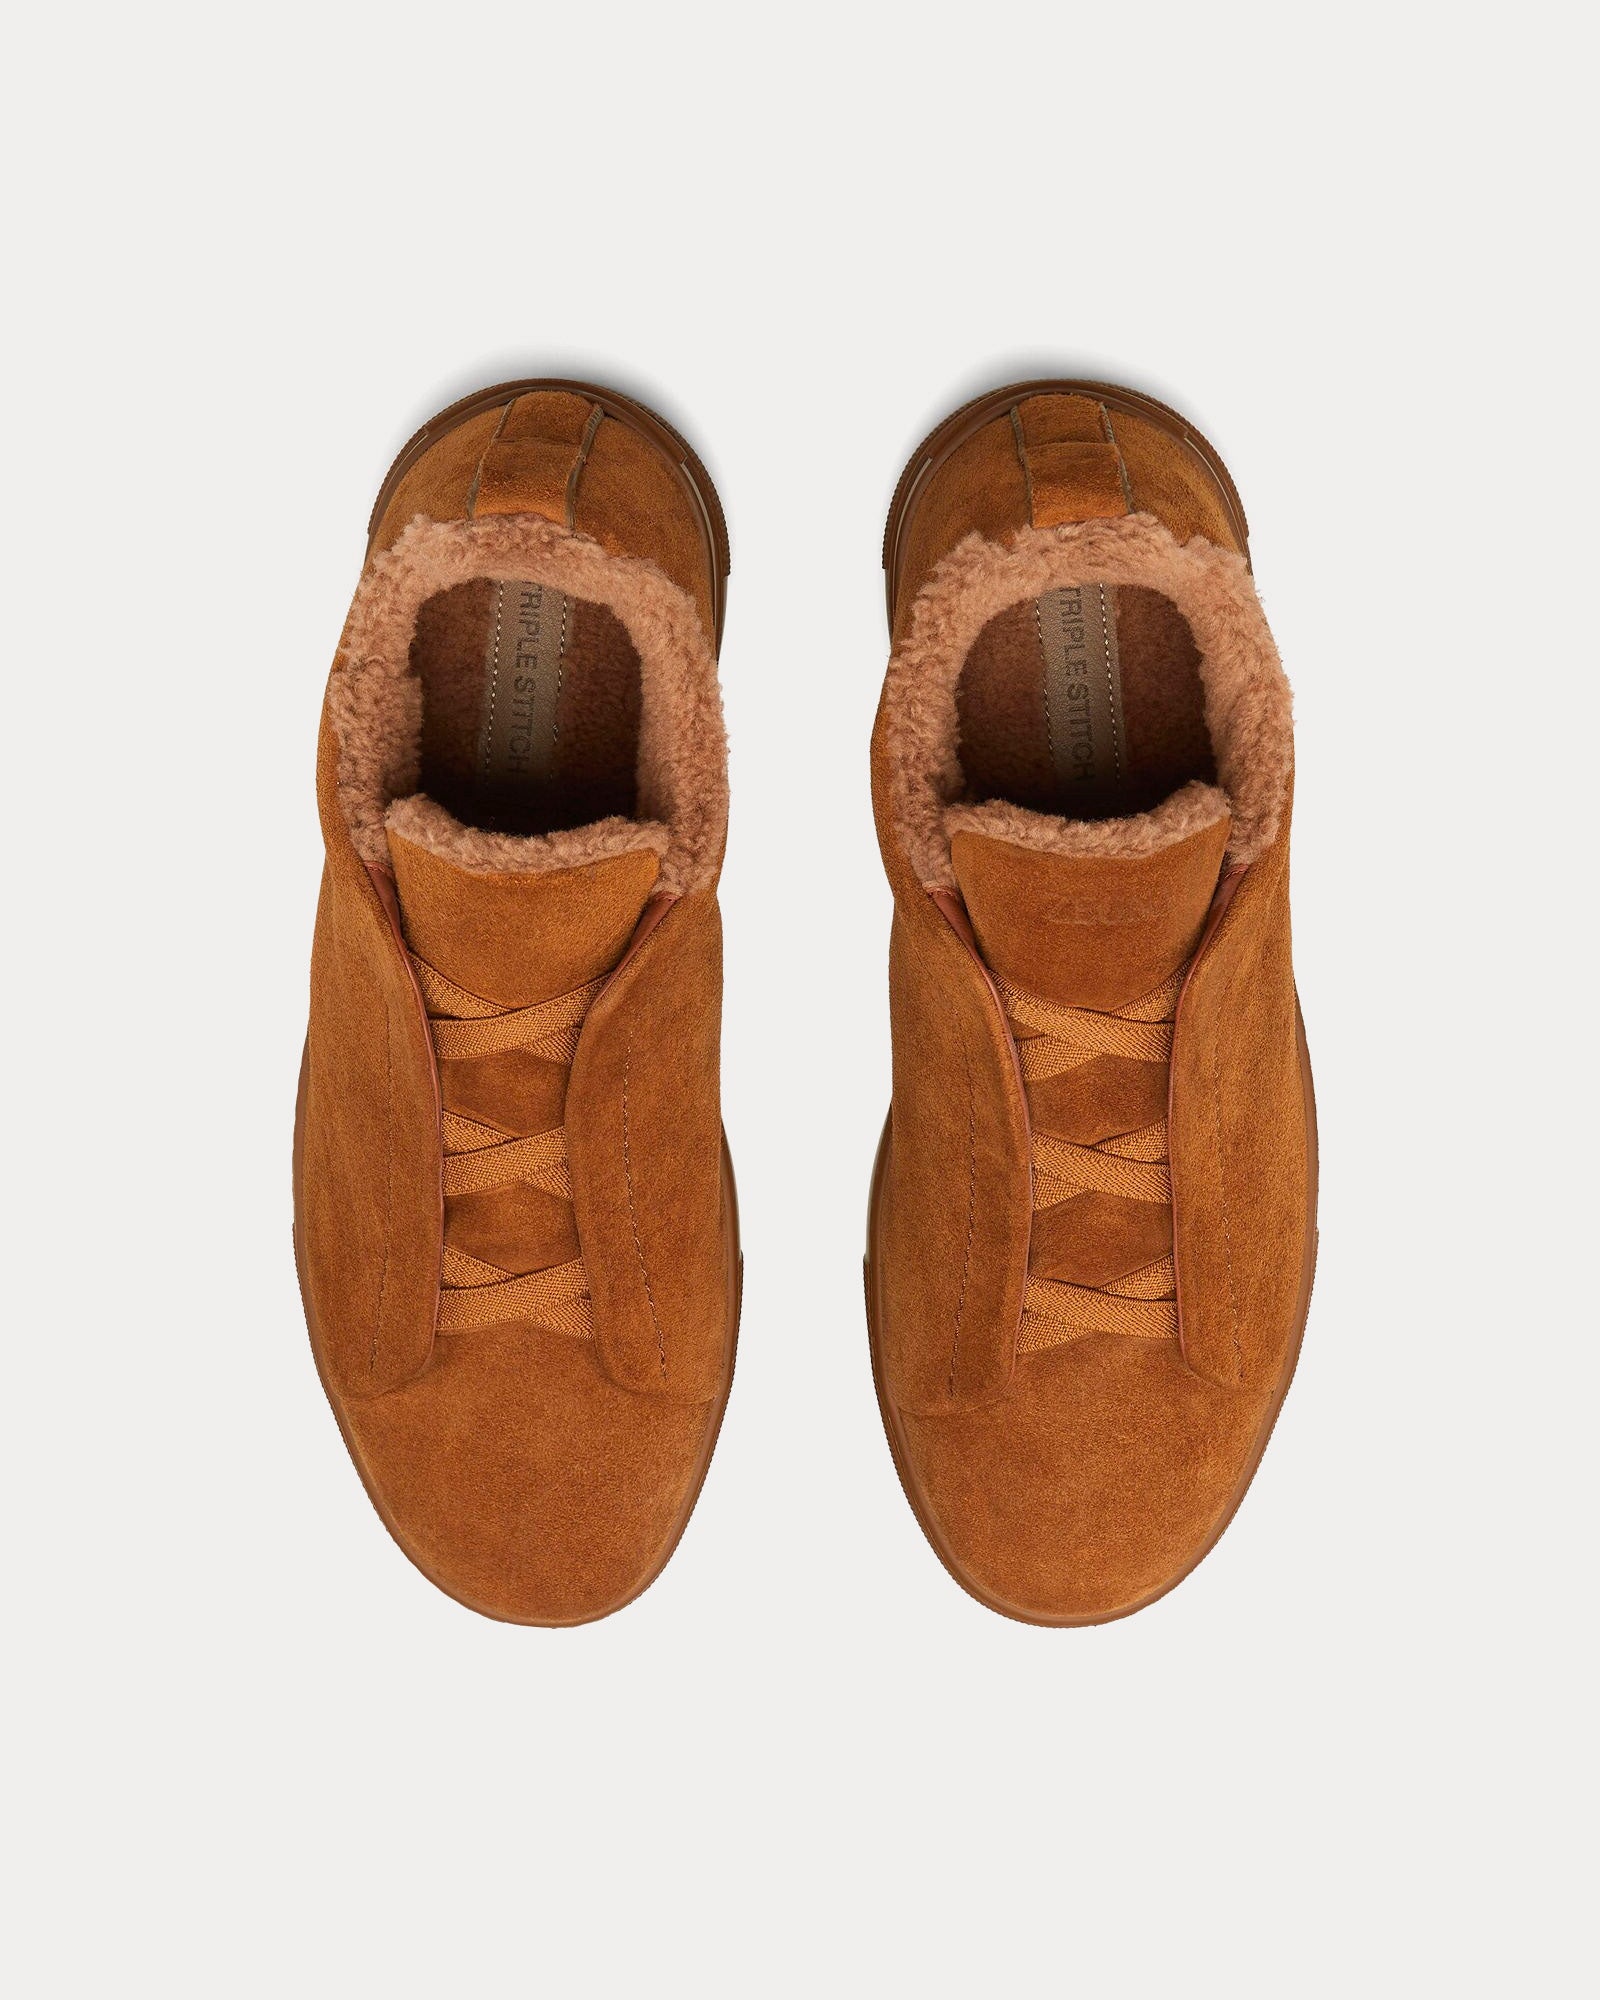 Zegna - Triple Stitch Suede & Shearling Light Brown Slip On Sneakers